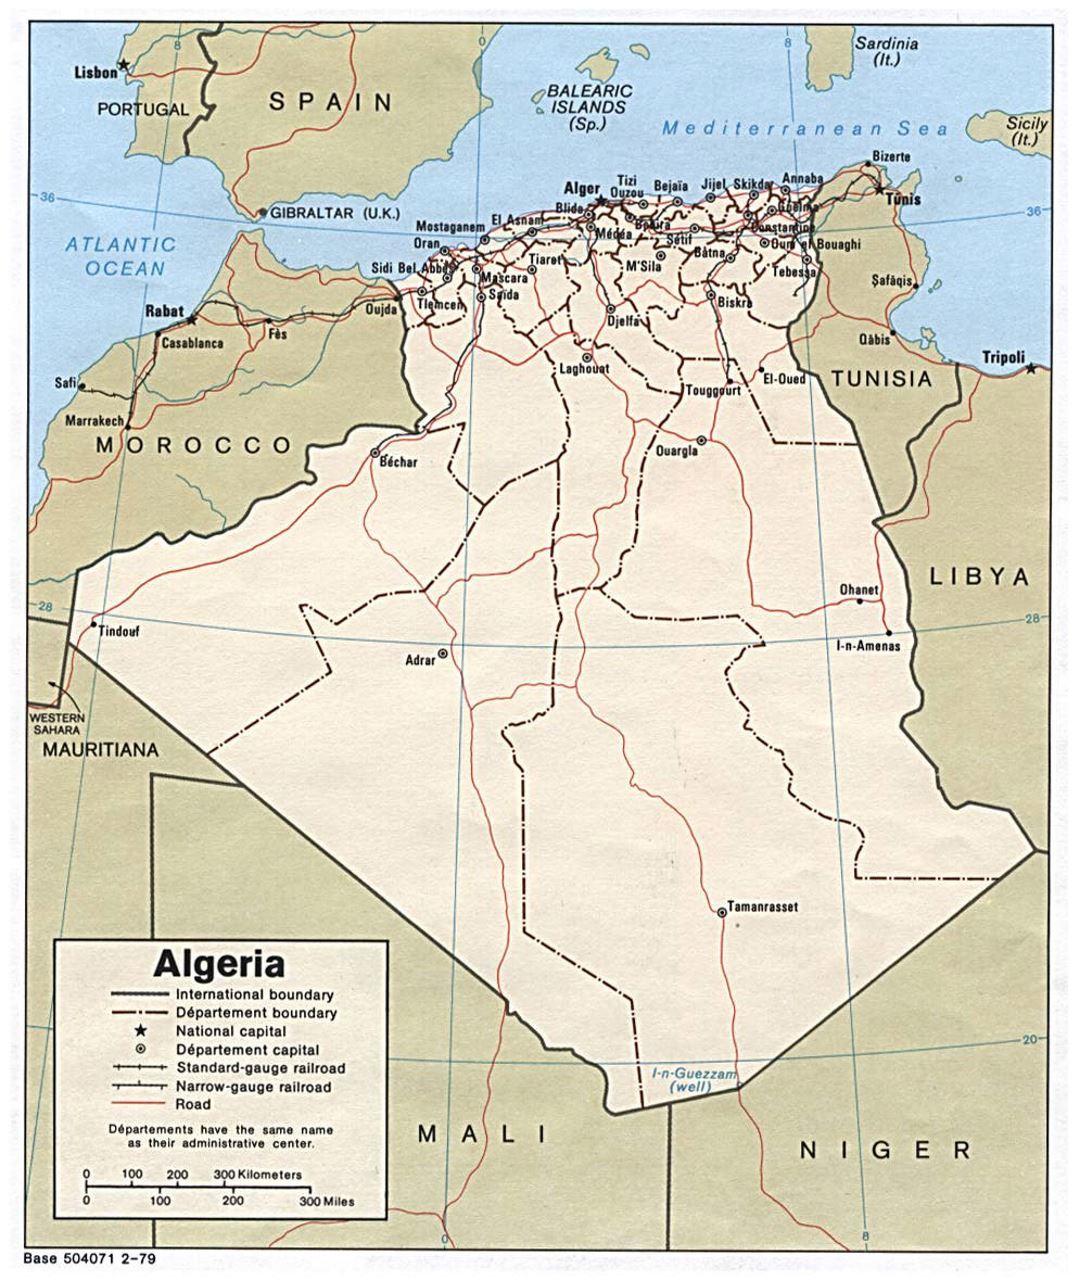 Detailed political and administrative map of Algeria with roads, railroads and major cities - 1979